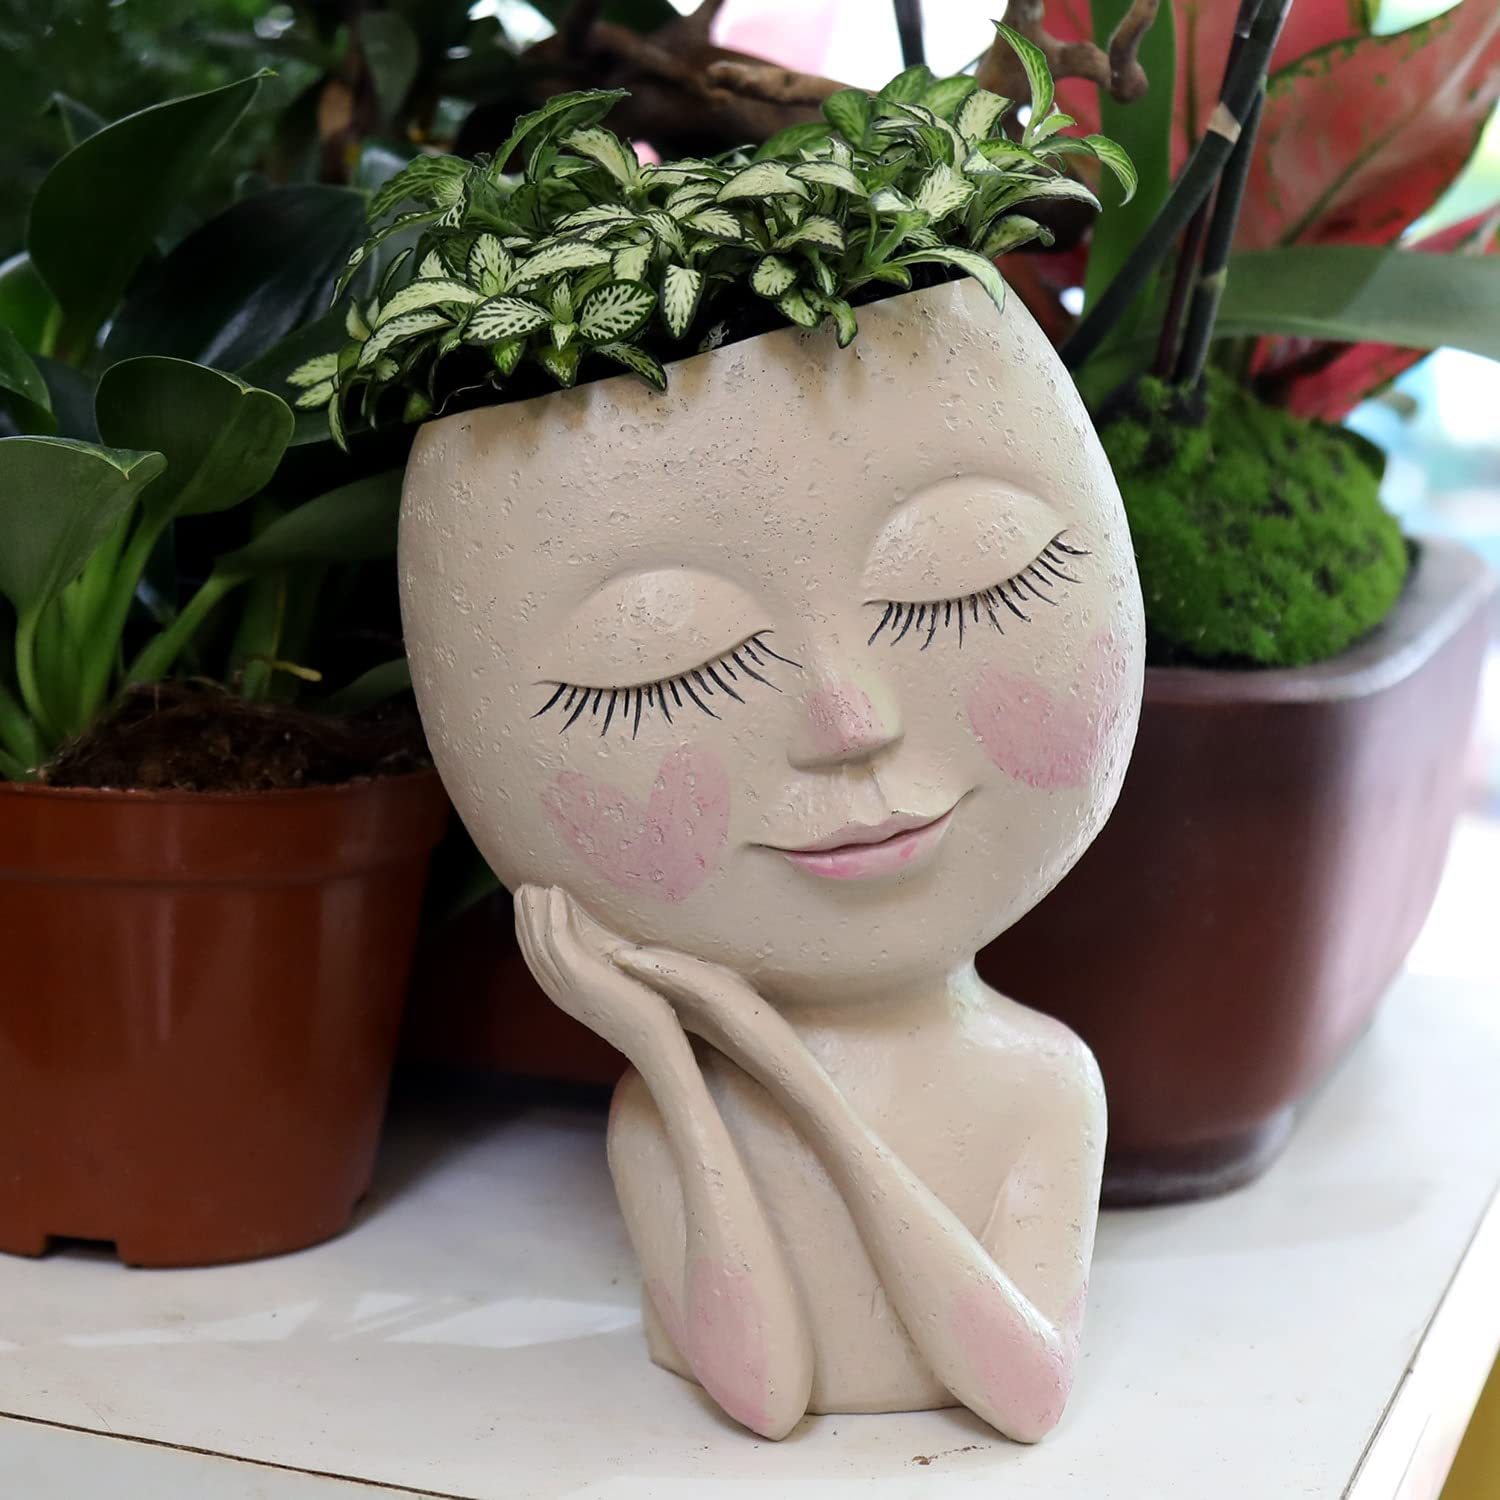  UMESONG Smiley Face Flower Pots Head Planter for